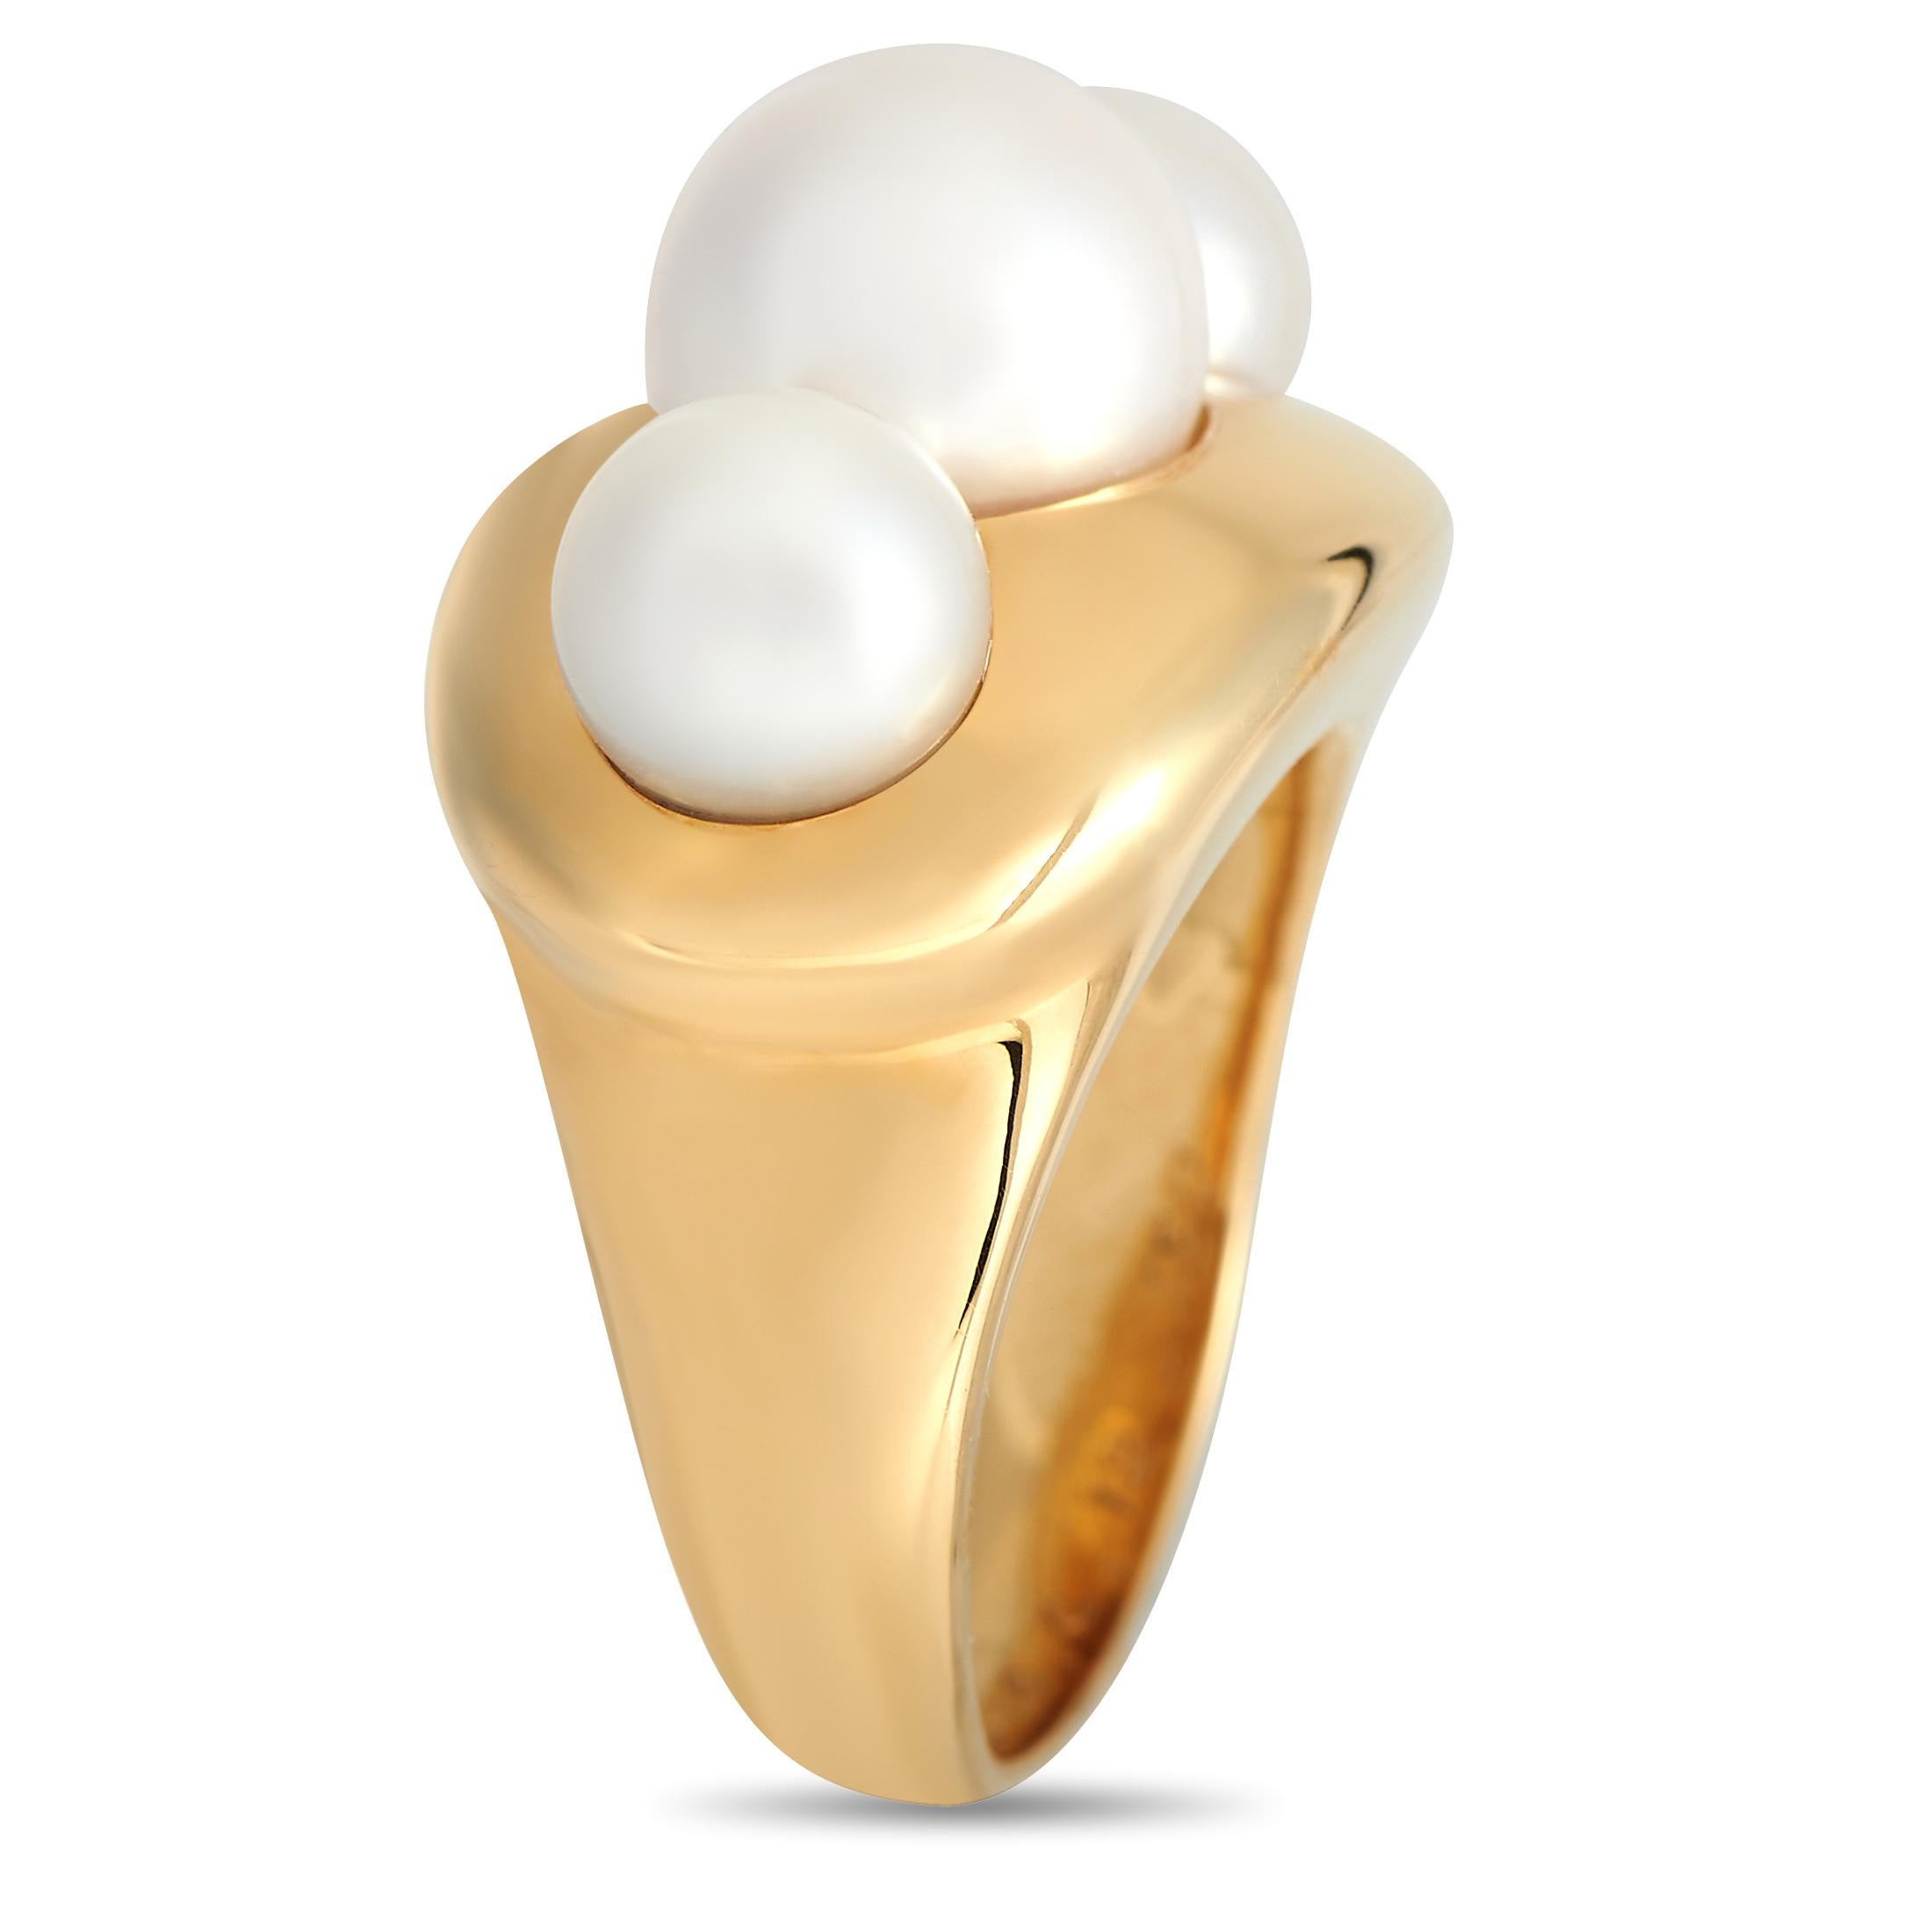 The ever-classy pearl jewelry is given a bold twist by Chanel. This pearl trio ring in 18K yellow gold comes with a domed band with a high-polish finish and an extra-thick top. Three round cultured pearls take a prominent seat on the band's chunky